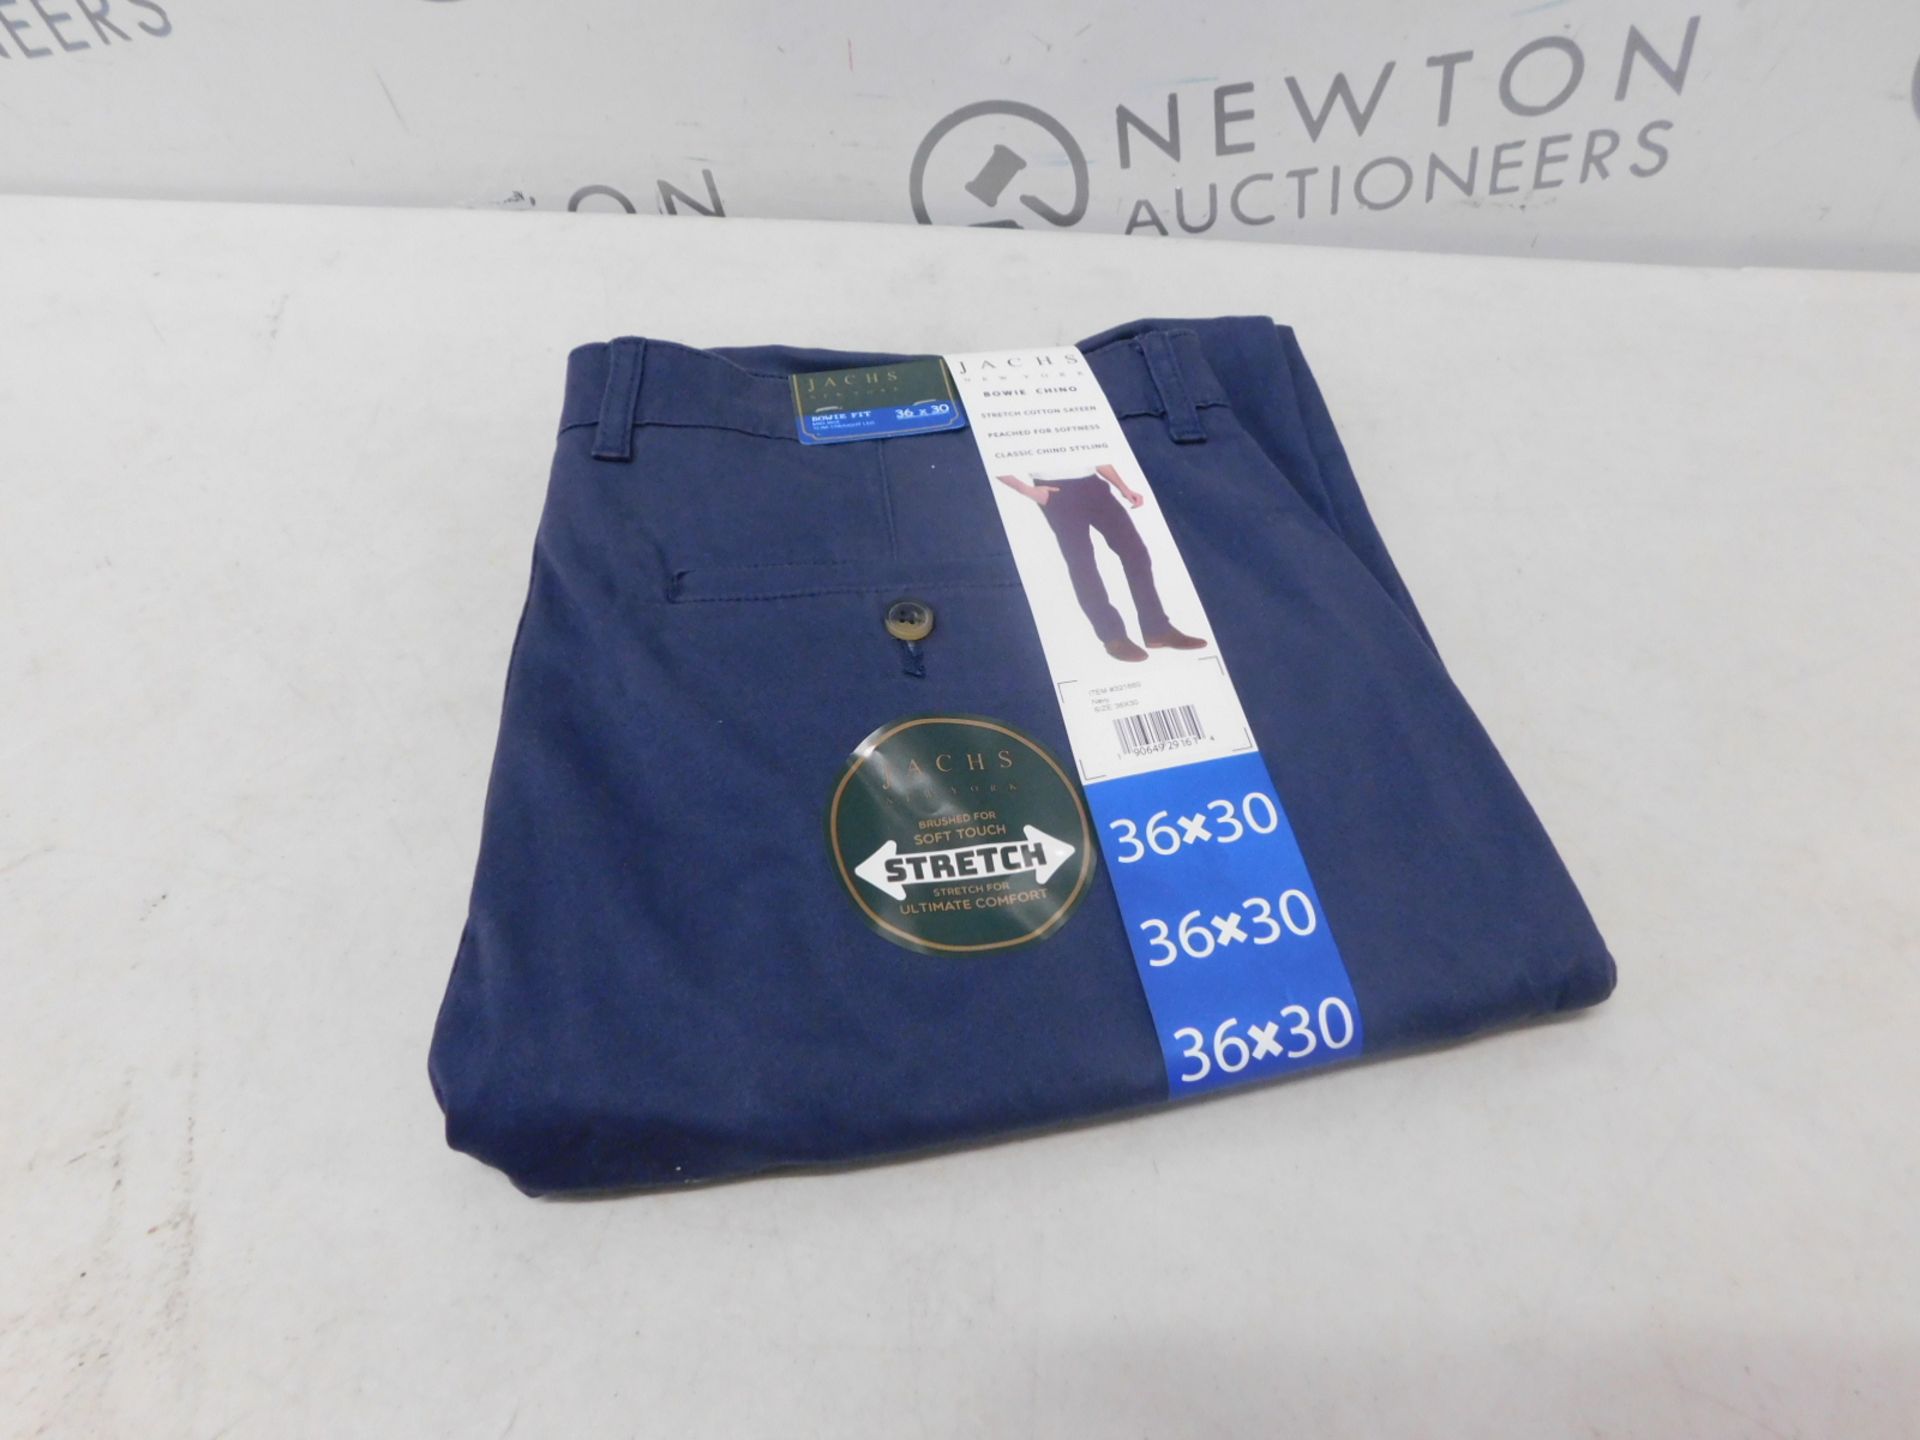 1 JACHS NEW YORK CLASSIC CHINO TROUSERS SIZE 36X30 RRP Â£79.99